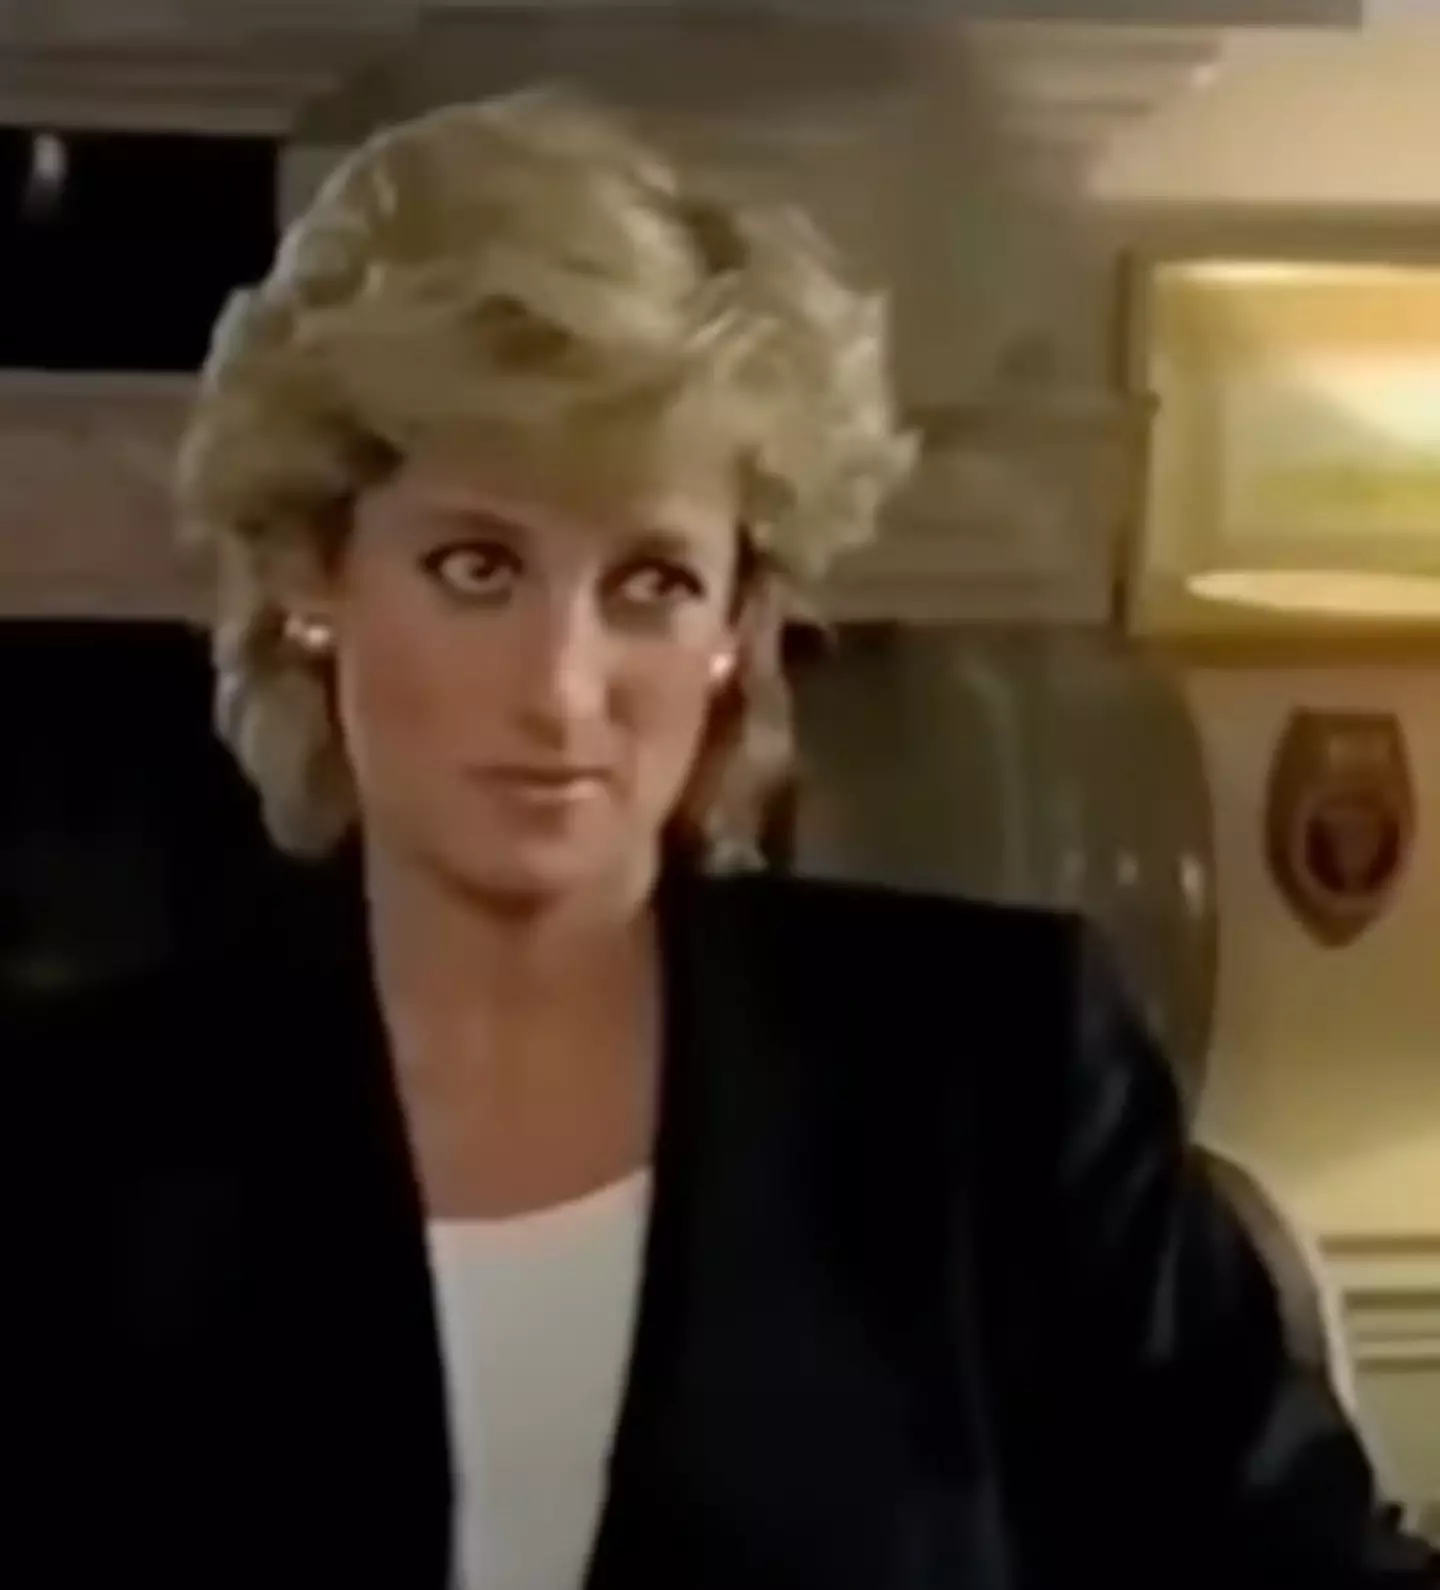 Princess Diana was known to have struggled immensely with her mental health when she was a member of the royal family.